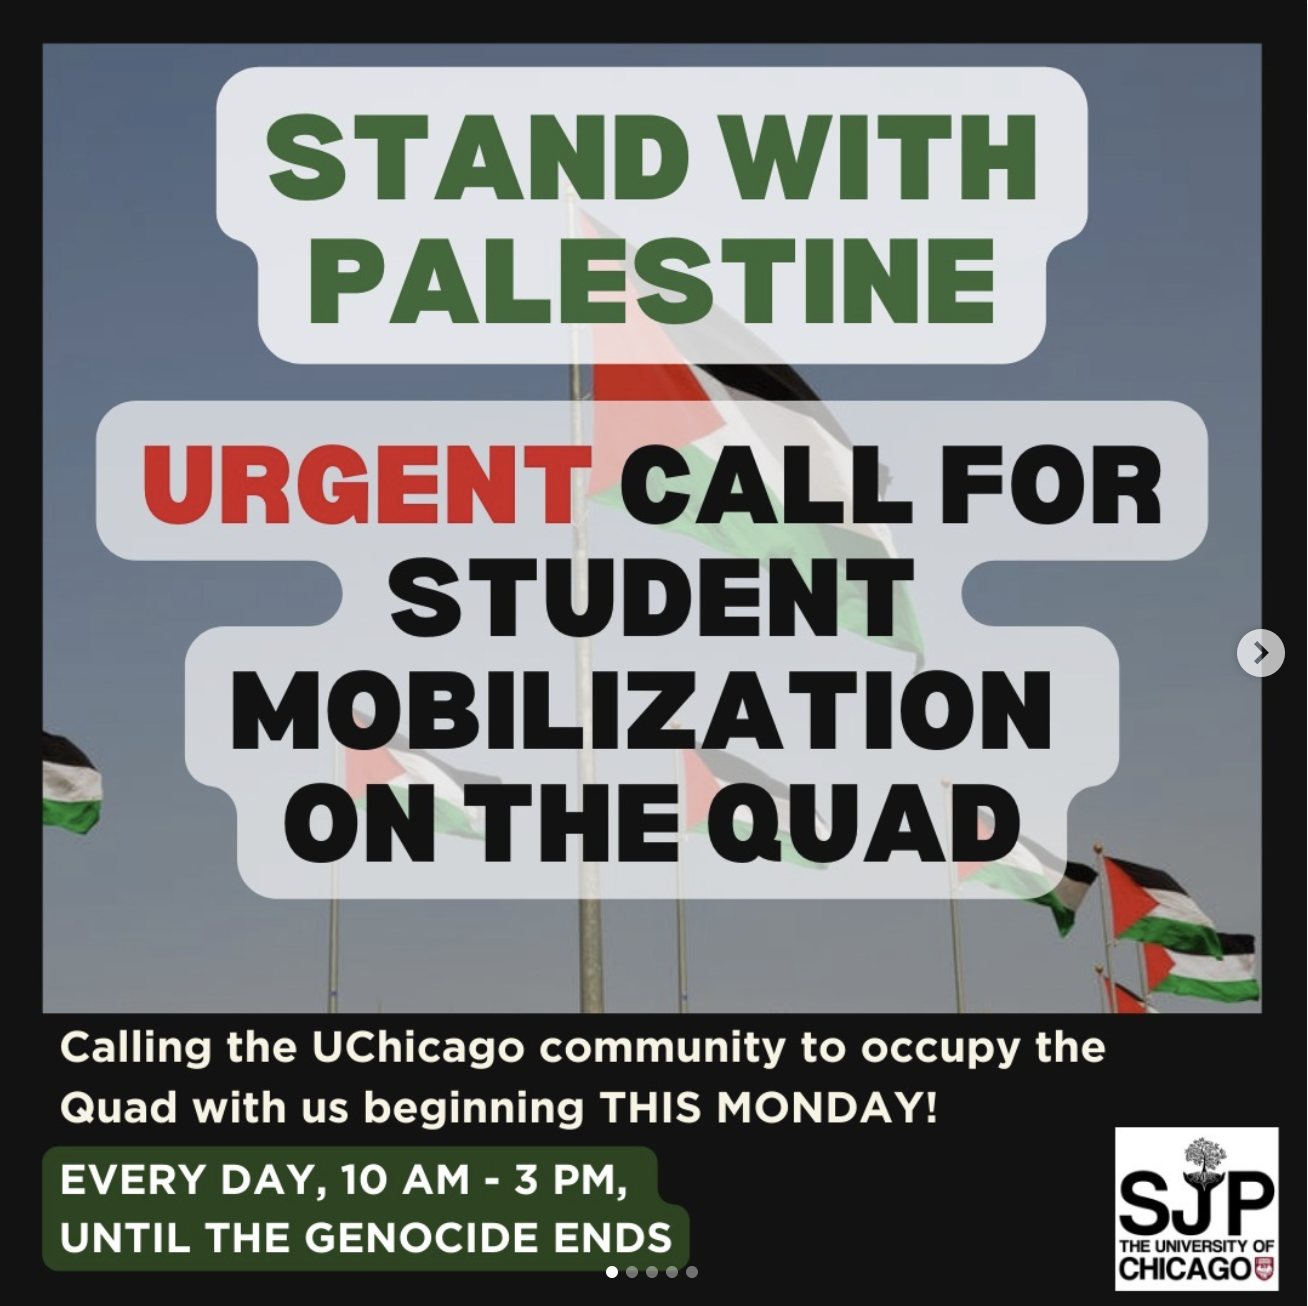 A flier that reads stand with Palestine, Urgent call for student mobilization on the quad. In the bottom left, text reads calling the UChicago community to occupy the Quad with us beginning this monday! Every day, 10am - 3pm, until the genocide ends.